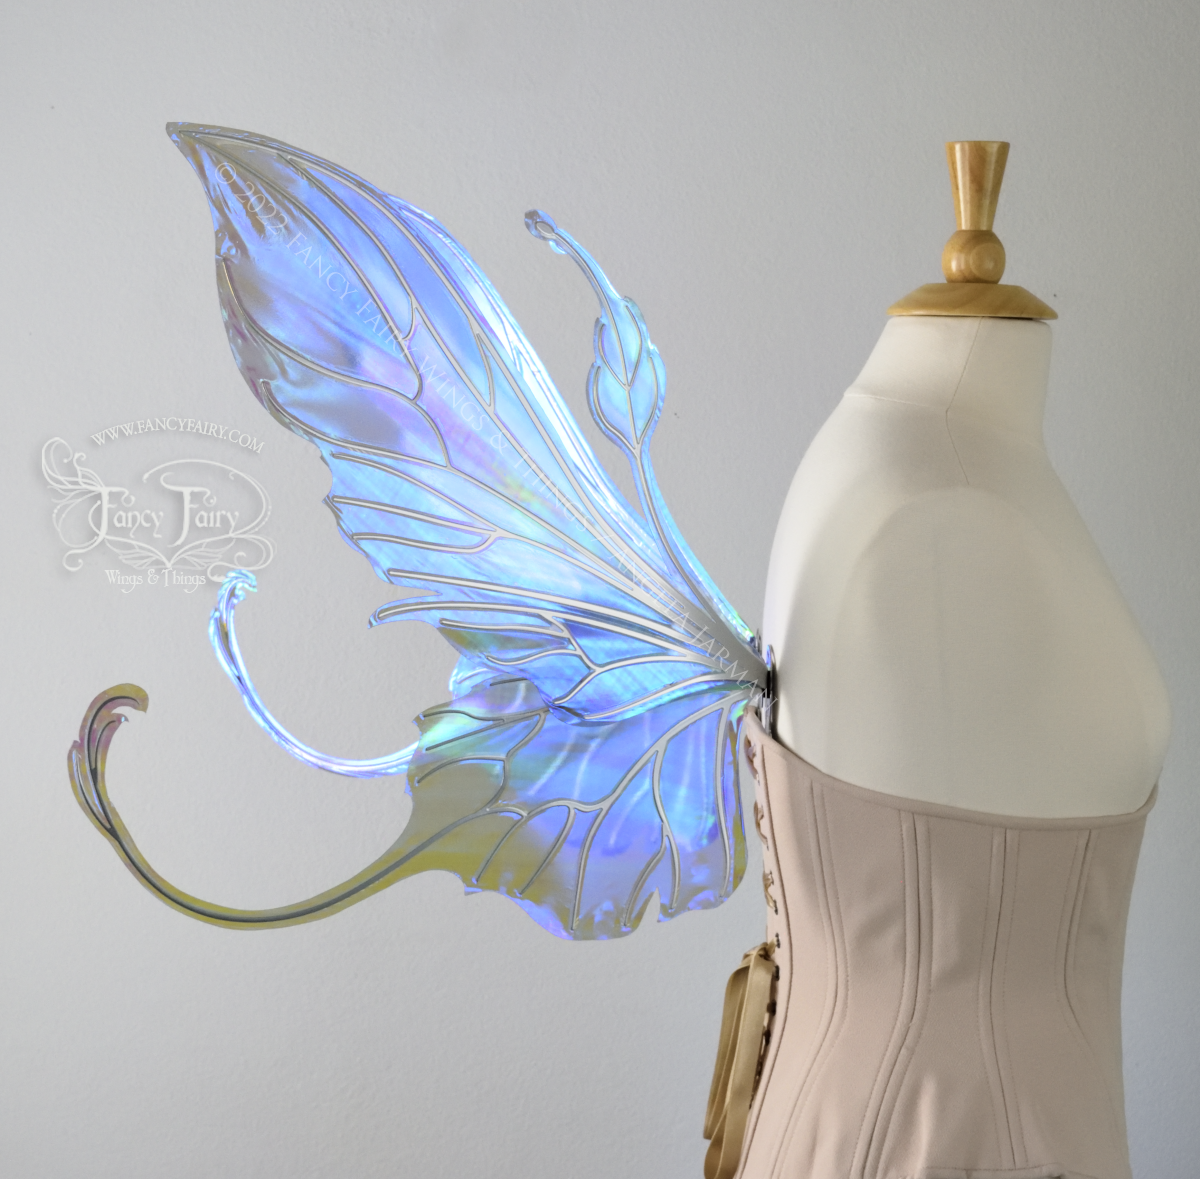 Left side view #2 of an ivory dress form wearing an alabaster underbust corset & large purple/blue iridescent fairy wings with elongated upper panels & antennae with bottom panels that have a tail curving upwards, silver veins